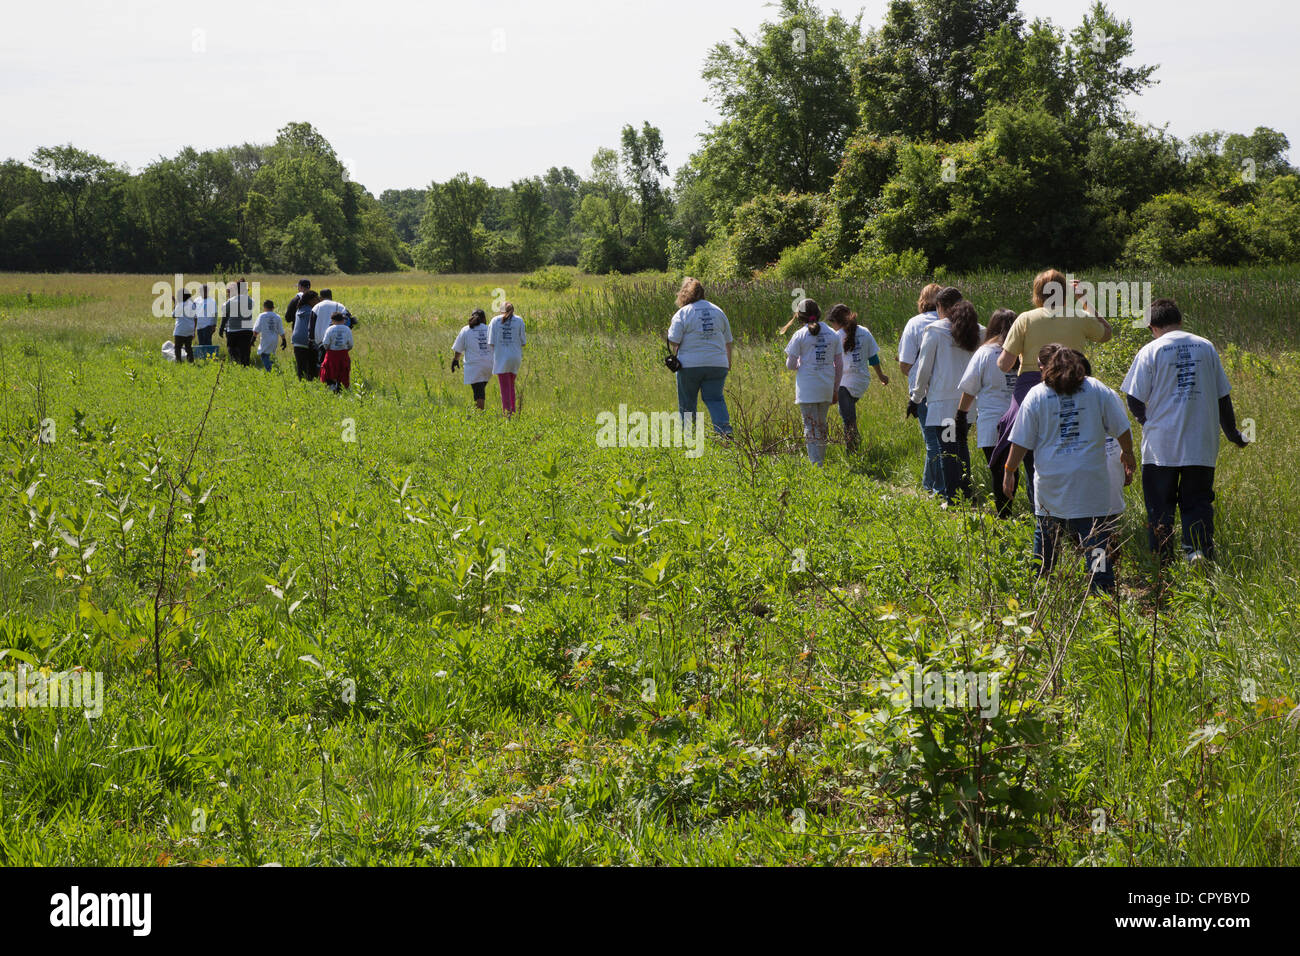 Detroit, Michigan - Students from Neinas elementary school on a field trip in Rouge Park. Stock Photo